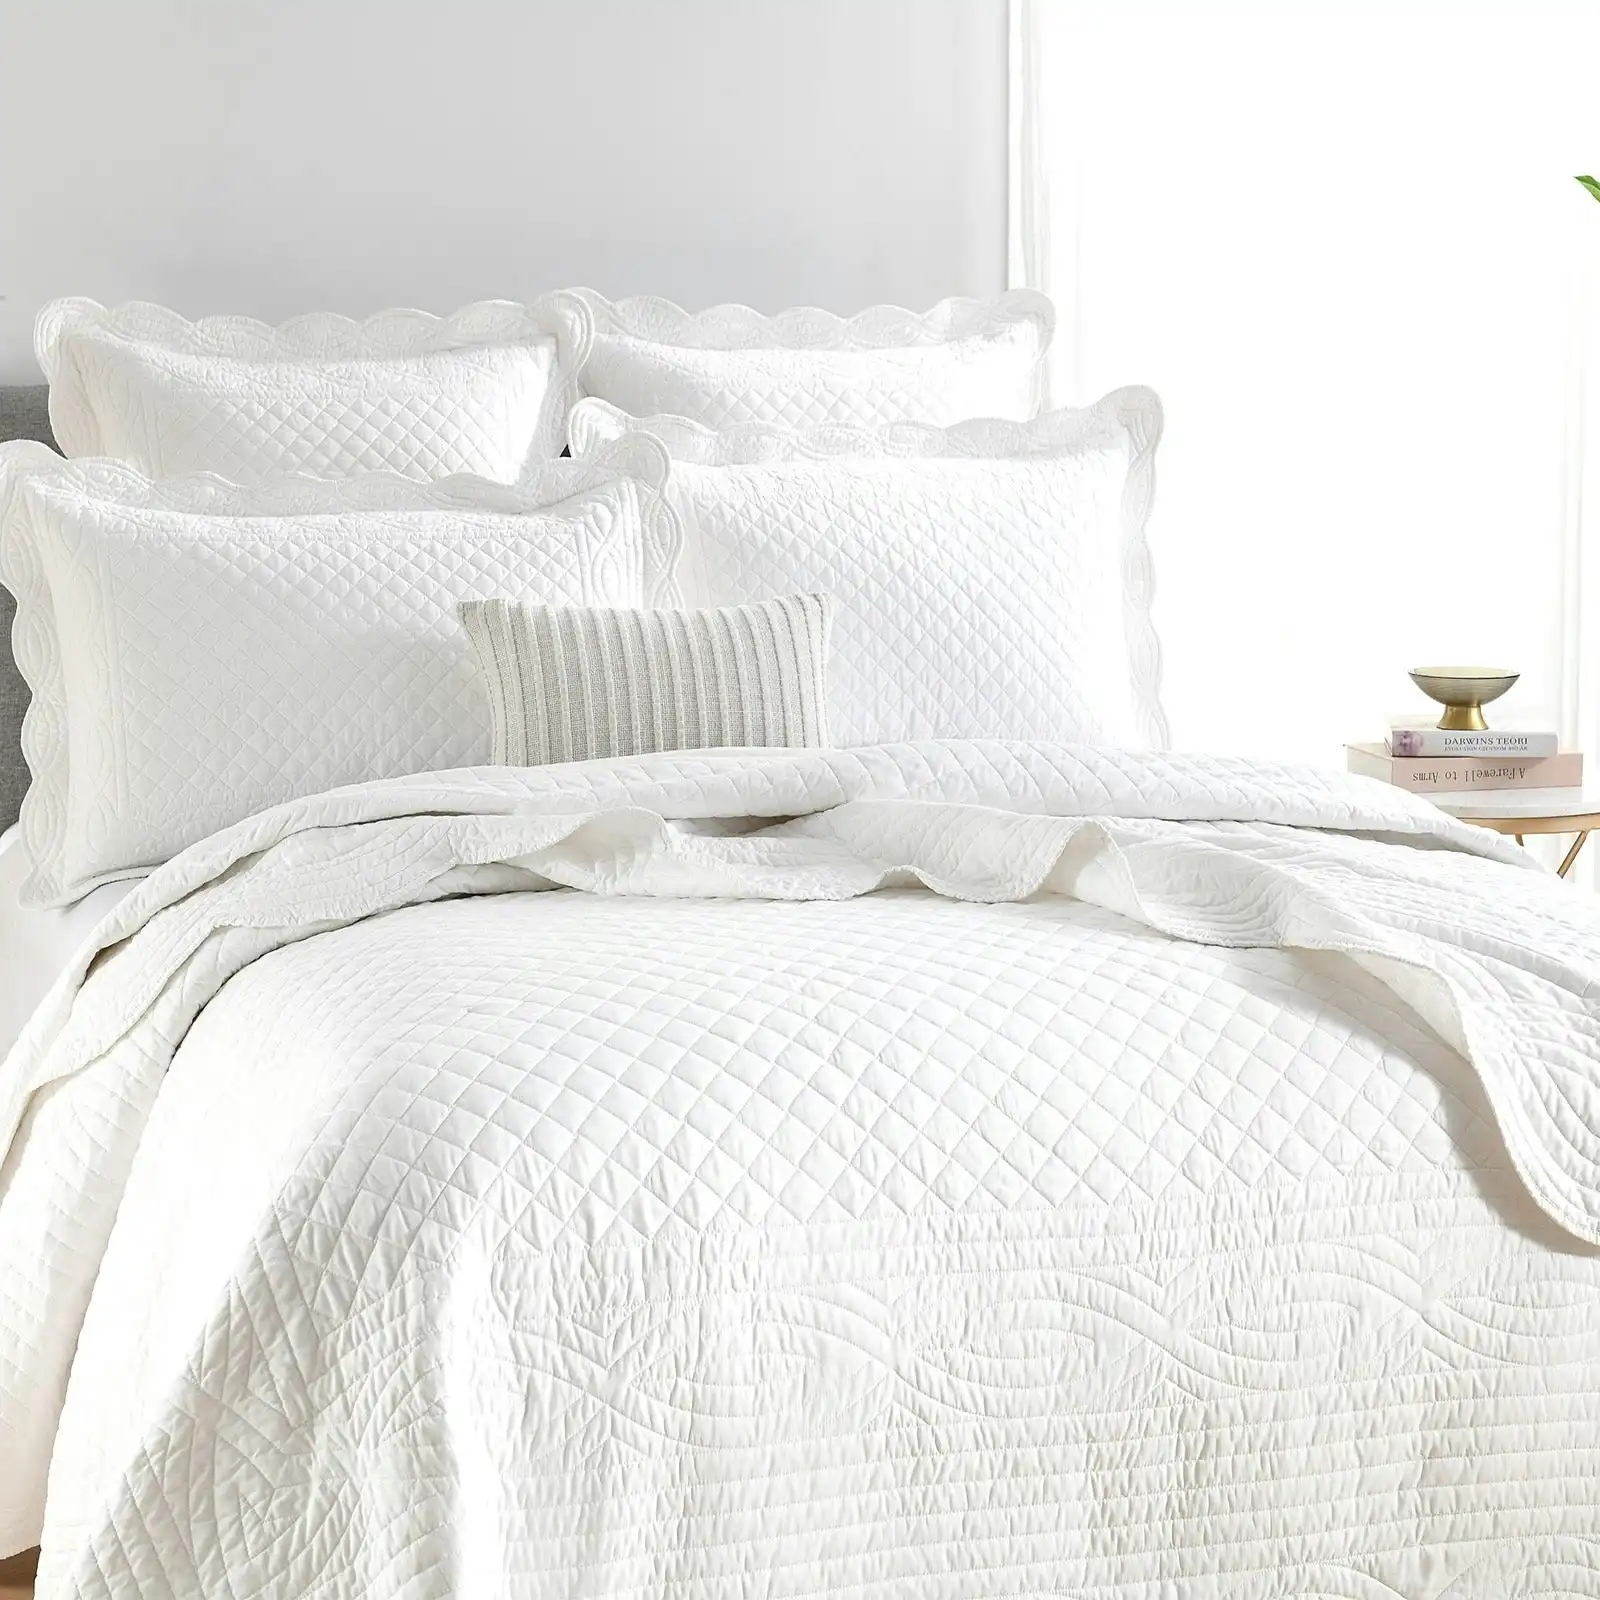 Scallop Pearl Jacquard Coverlet Set by Renee Taylor